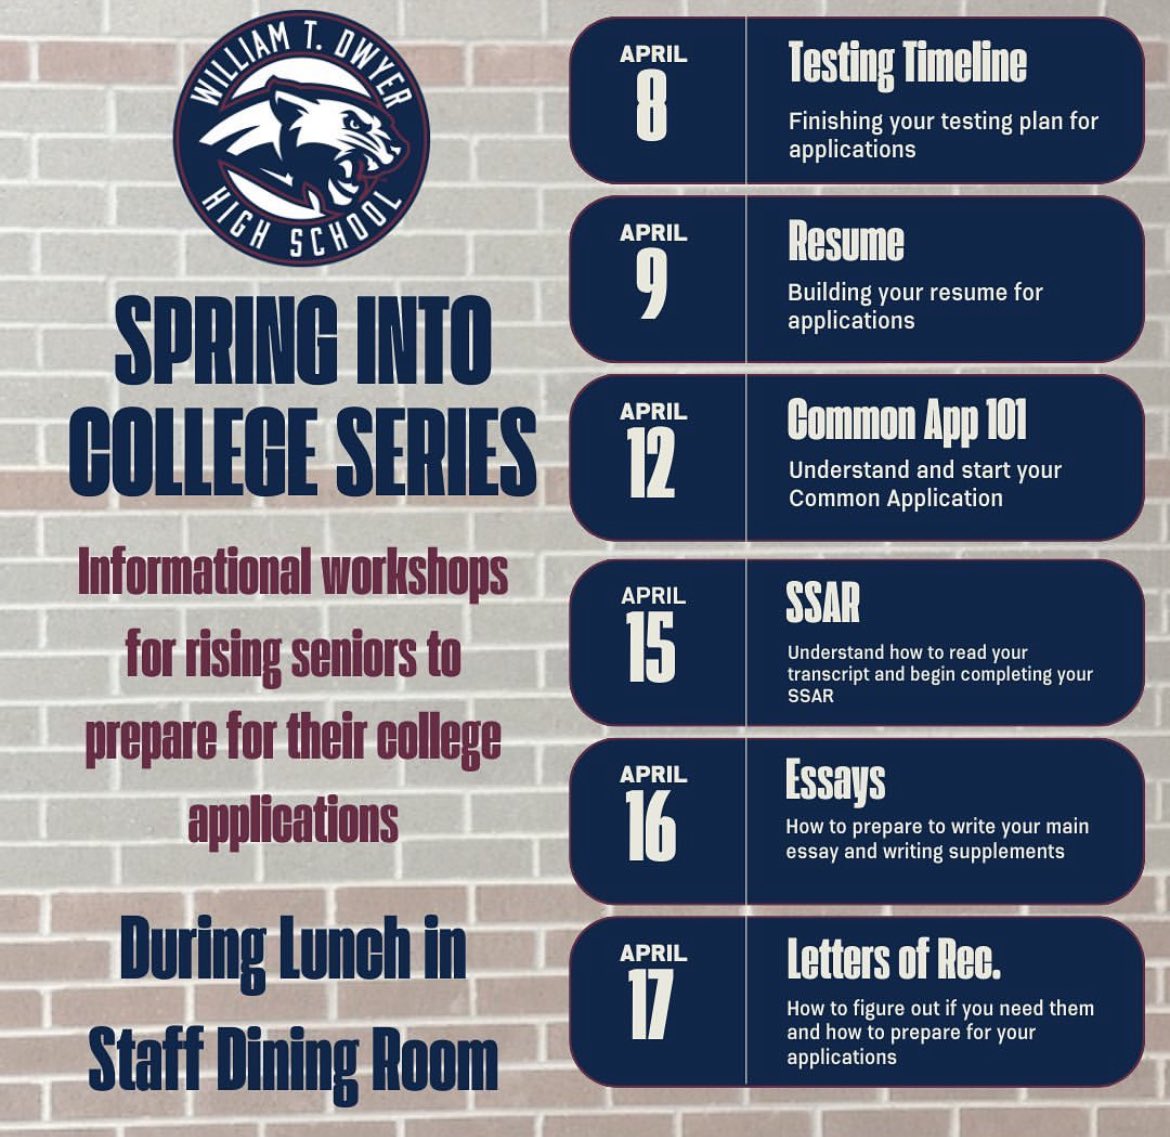 Attention Dwyer Juniors: Get a head start on college admissions prep by attending our “Spring into College Series” during your lunch period in the Staff Dining Room inside the Cafeteria. #WeAreDwyer #CollegeReady